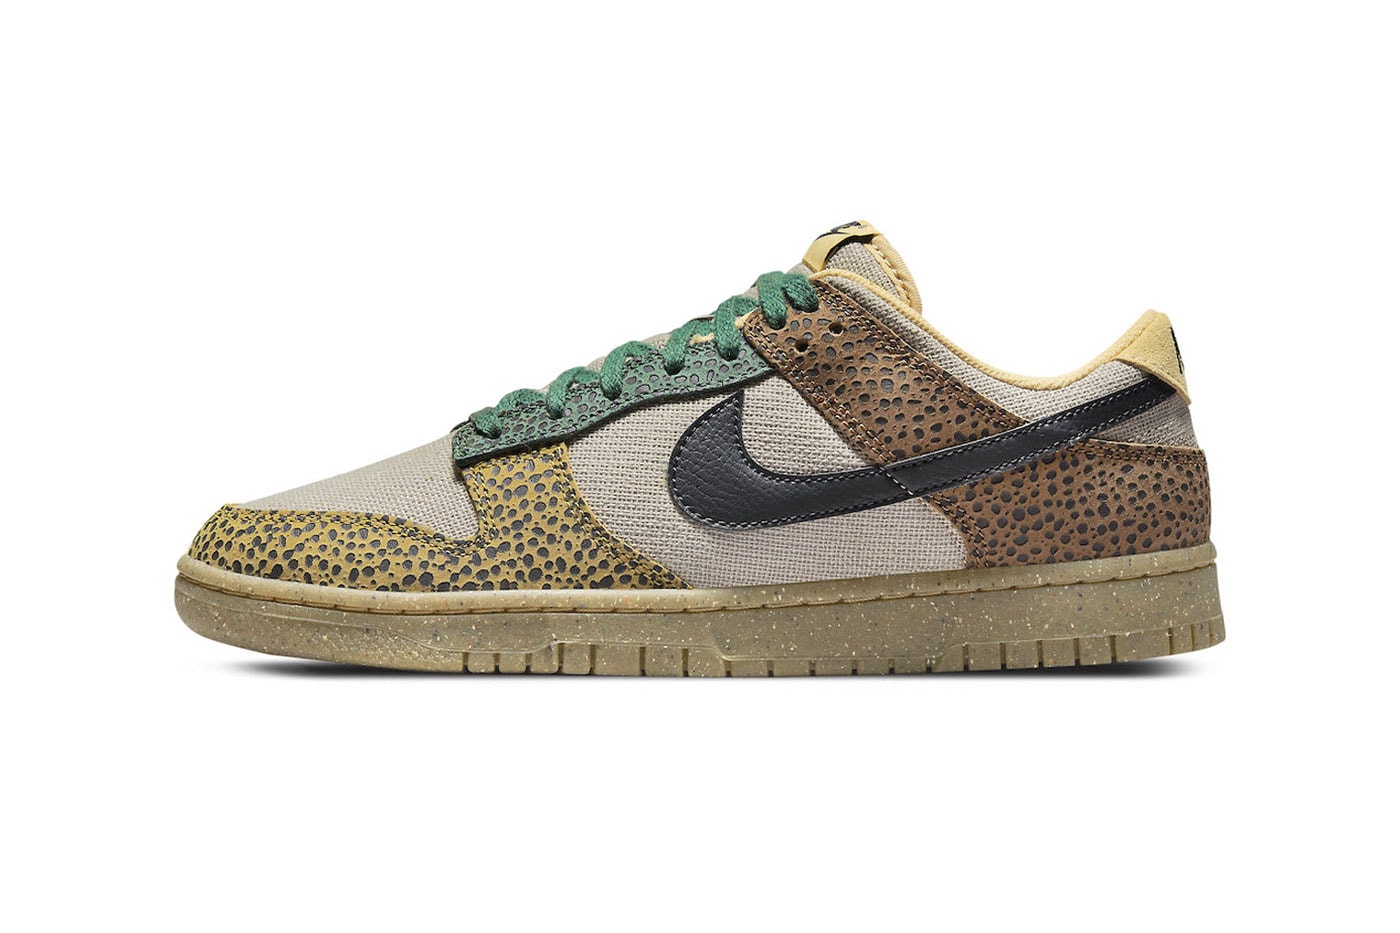 Nike Dunk Low Safari dx2654 200 cheetah print canvas leather green yellow brown black grind sole release info date price official images